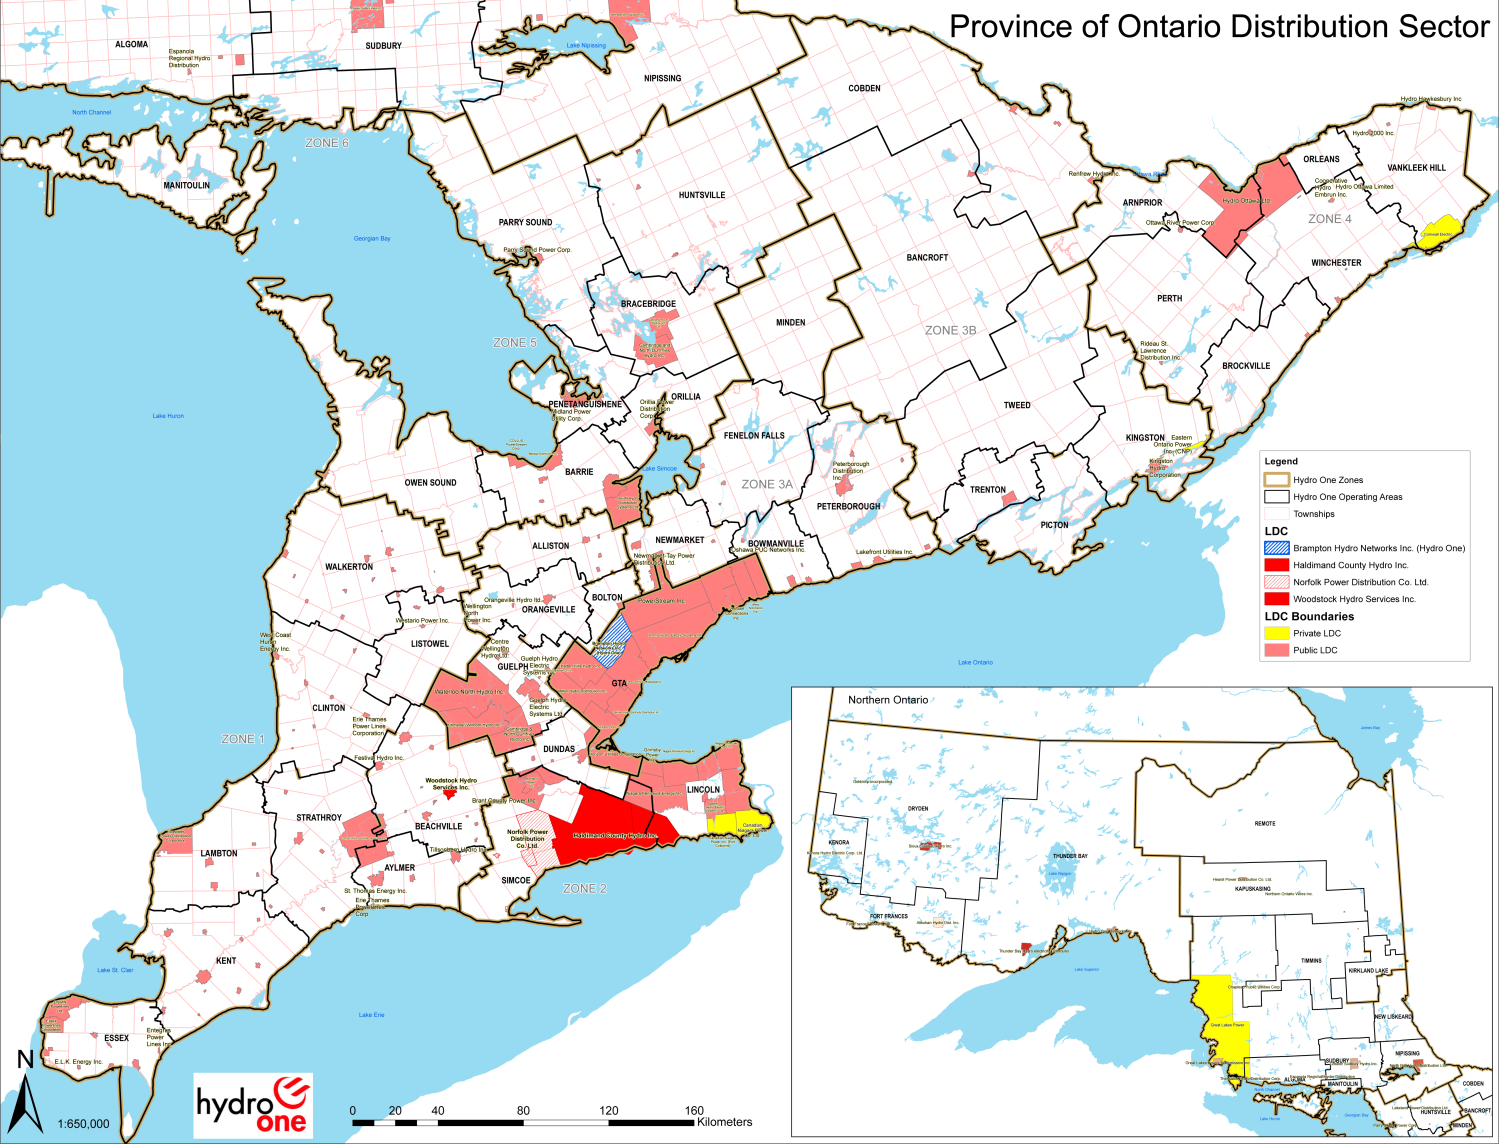 This is a map of the province of Ontario distribution sector. There are Hydro One Zones, Hydro One Operating Areas and Townships. Within these zones are local distribution companies, which include Brampton Hydro Networks Inc., Haldimand Country Hydro Inc., Norfolk Power Distribution Co. Ltd., Woodstock Hydro Services Inc.The map also shows private and public local distribution companies.